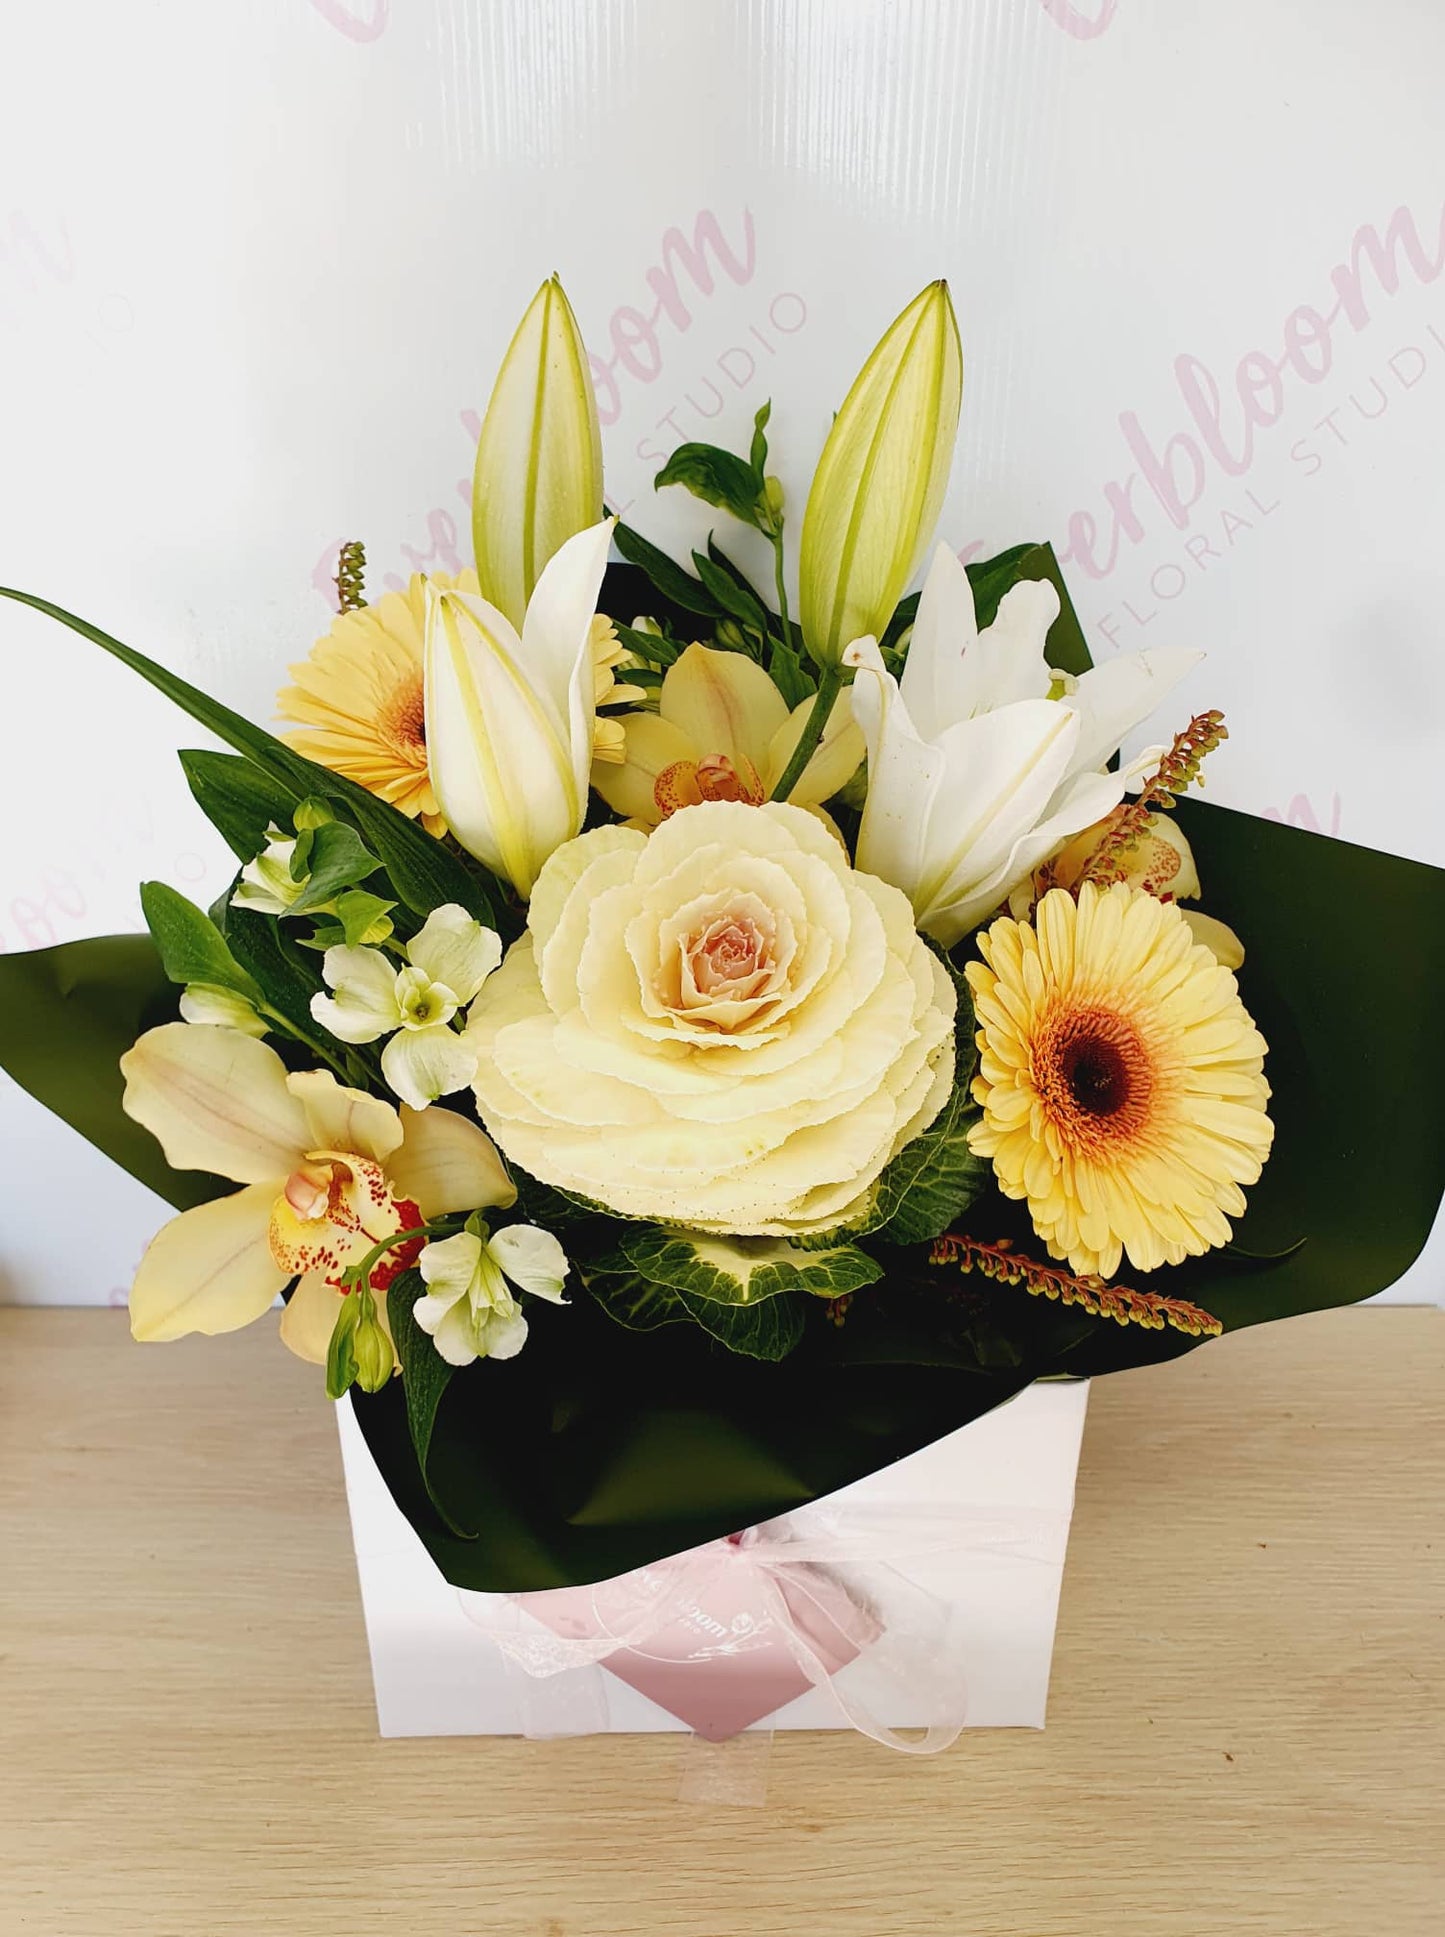 Fresh seasonal flower arrangement made in wet floral foam We offer same day flower delivery service locally to Tauranga, Mount Maunganui and Papamoa direct from our sunny boutique floral studio which is located near Bayfair, Mount Maunganui